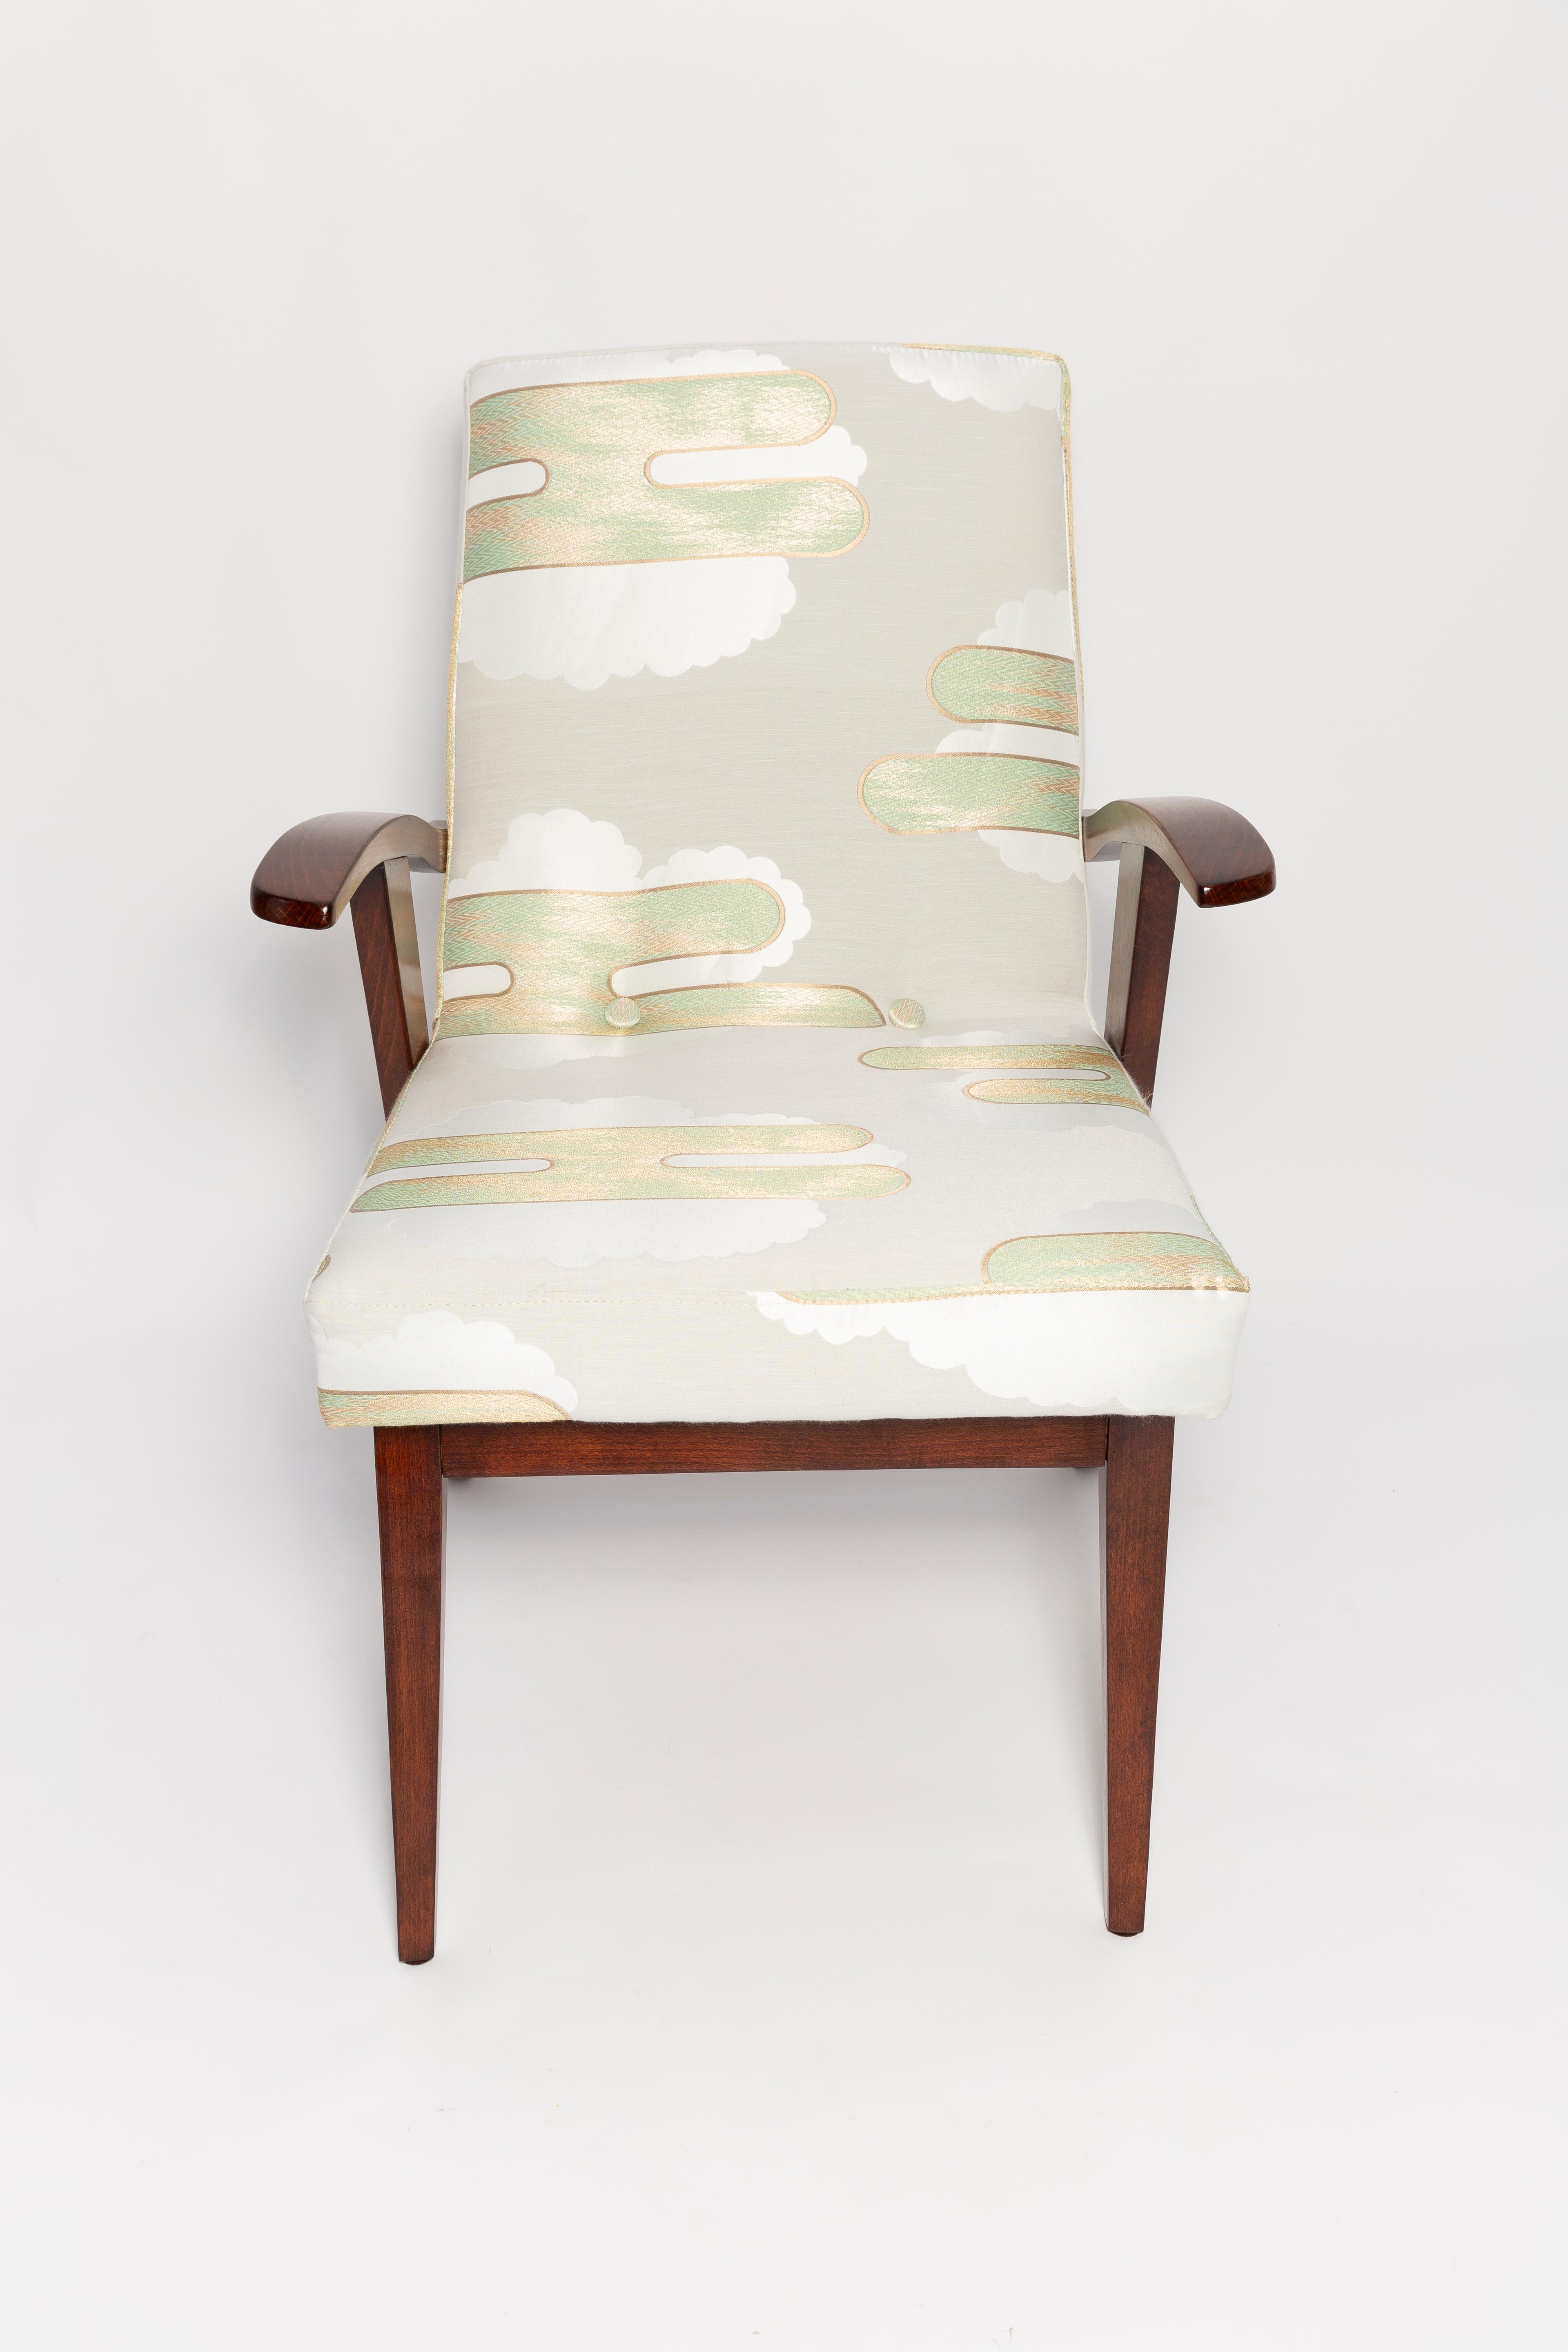 Textile Mid Century Lontano Jacquard Mint Green Armchair by M. Puchala, Europe, 1960s For Sale